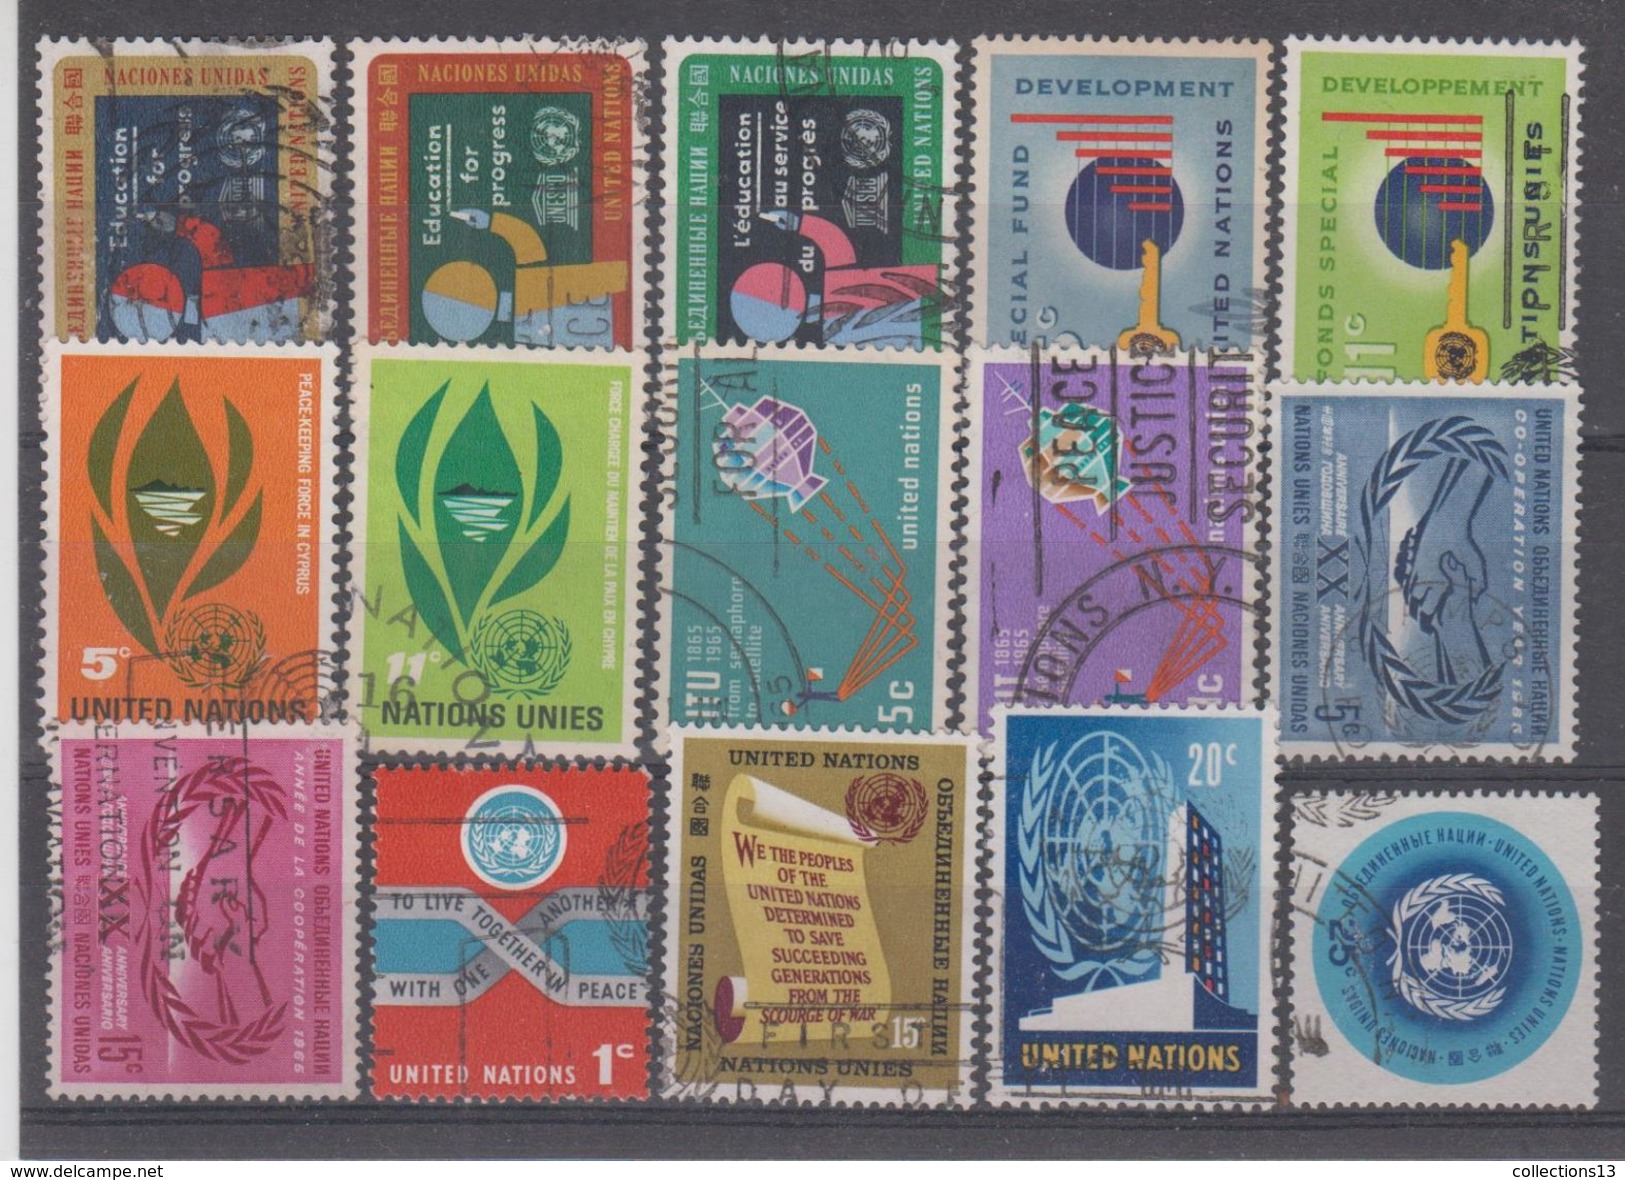 NATIONS UNIS - NEW YORK - 130/160 Obli Cote 14,25 Euros Depart A 10% - Used Stamps